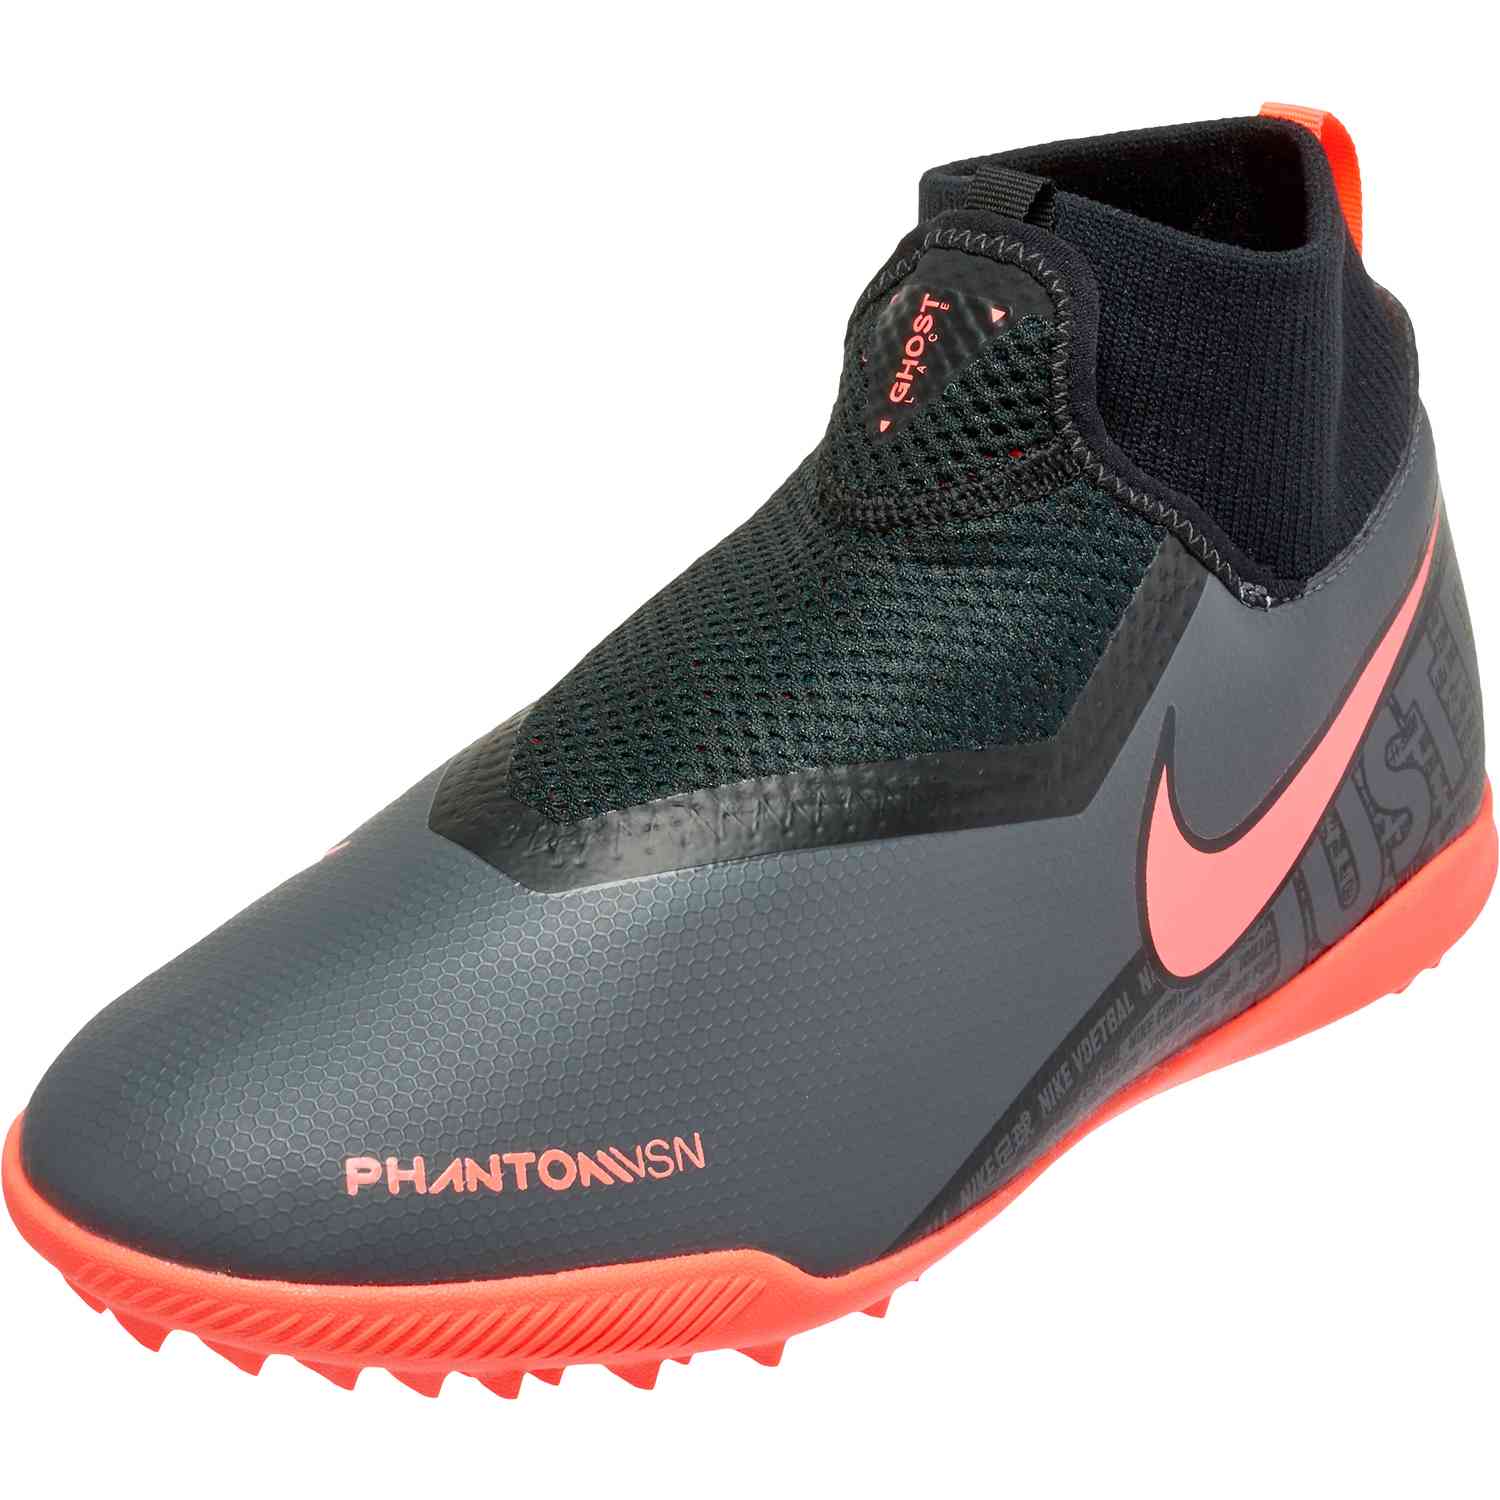 New Nike PhantomVSN Academy Dynamic Fit Game Over MG